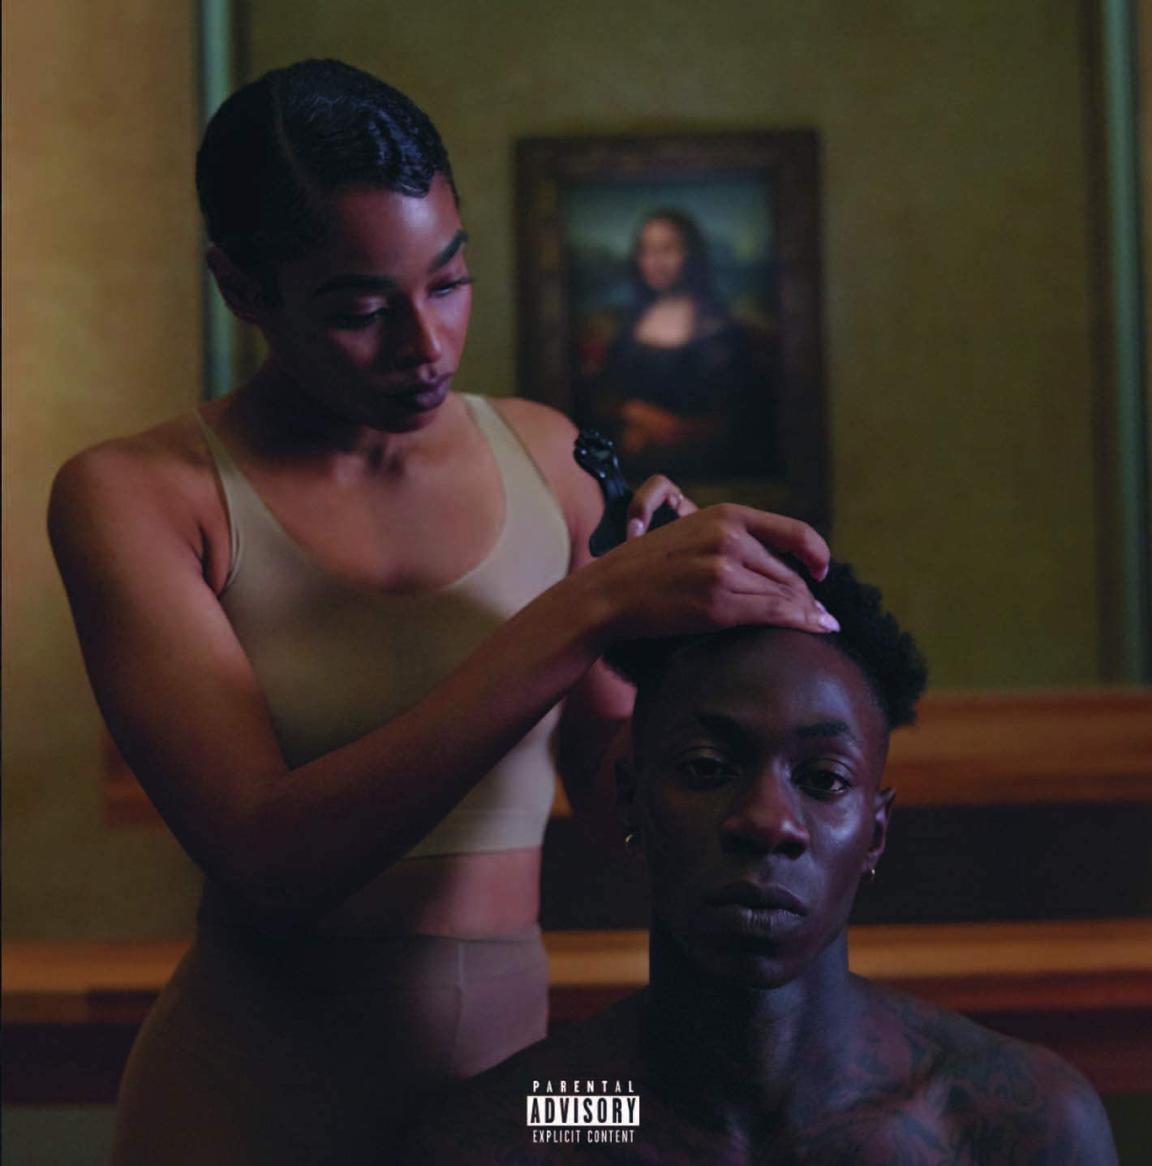 The Carters / Everything Is Love